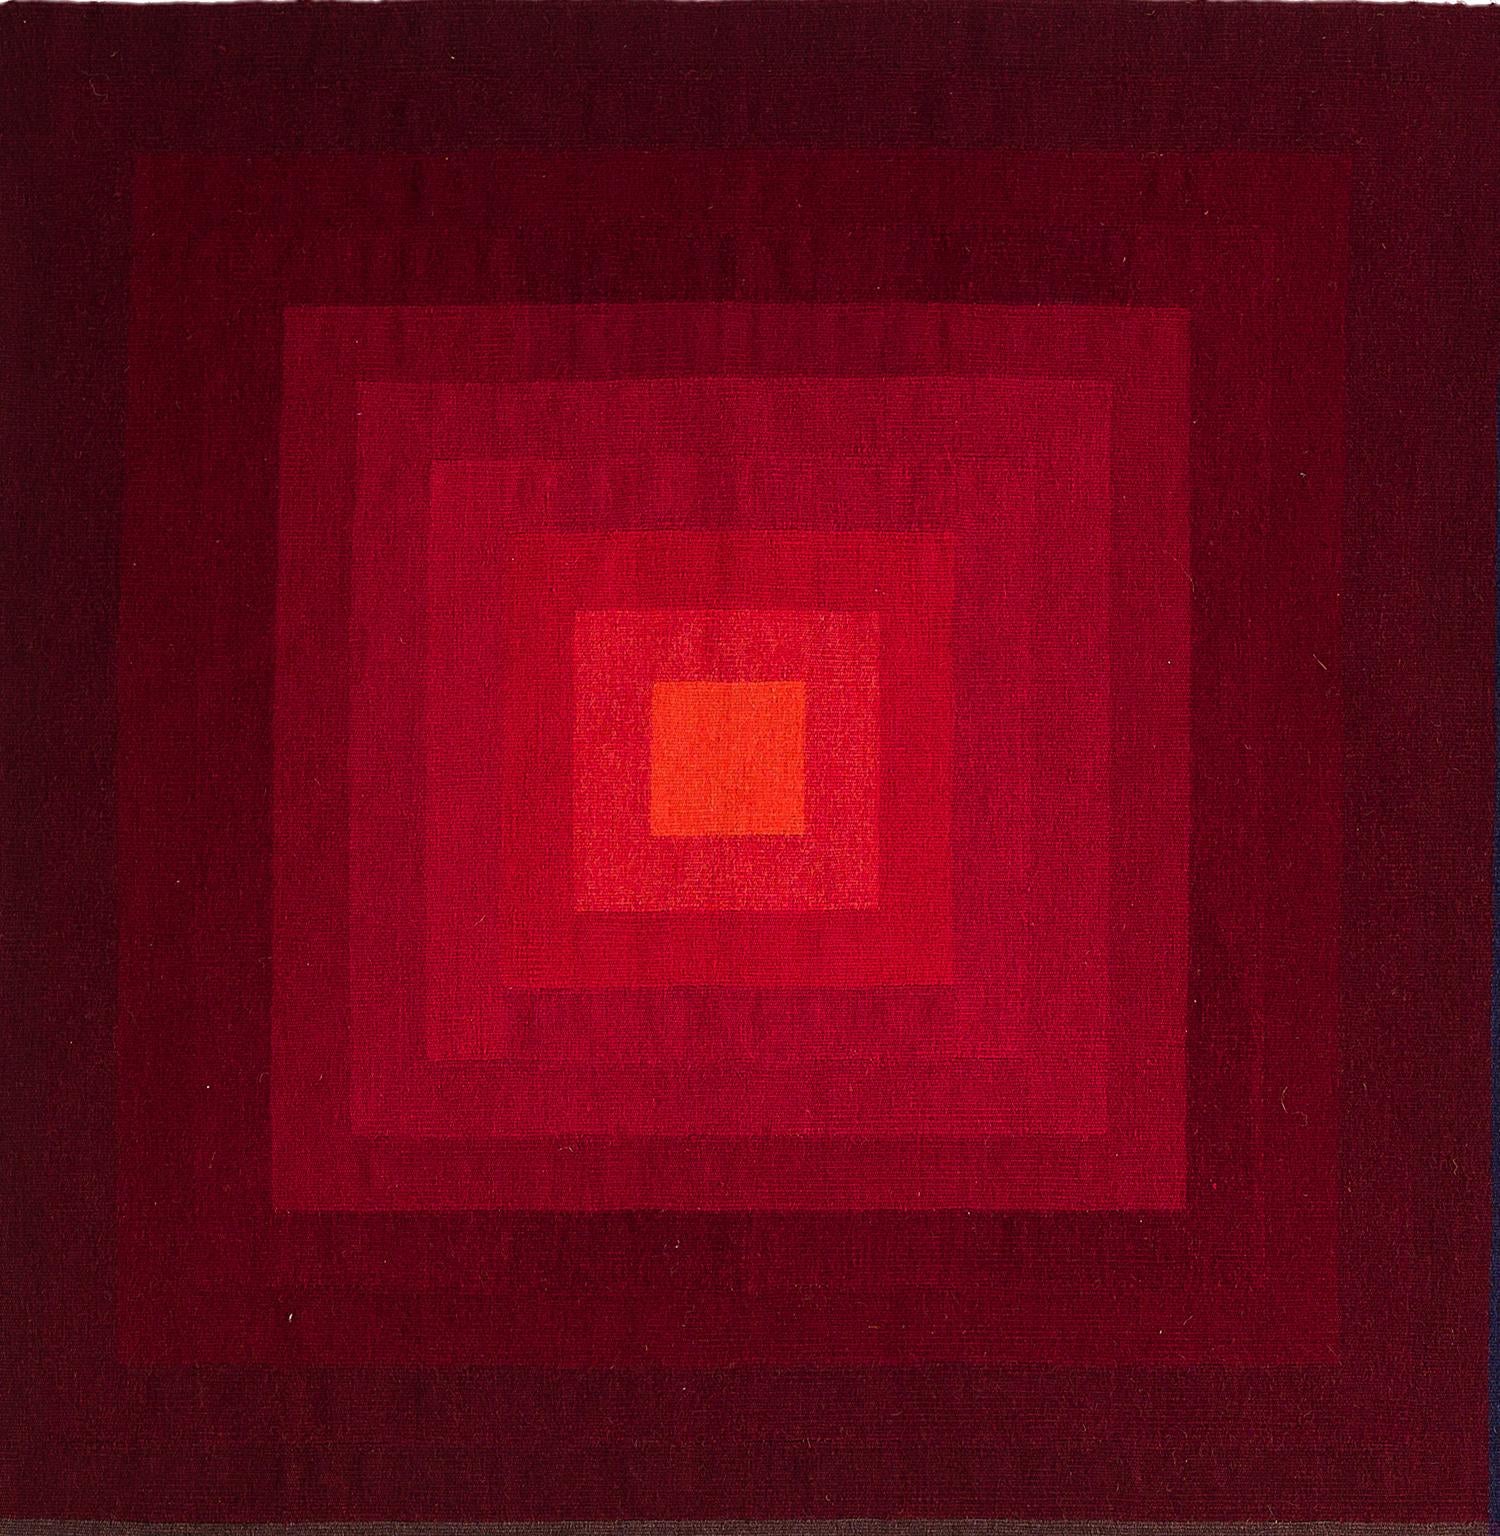 Hand-Woven Victor Vasarely Midcentury Tapestry 